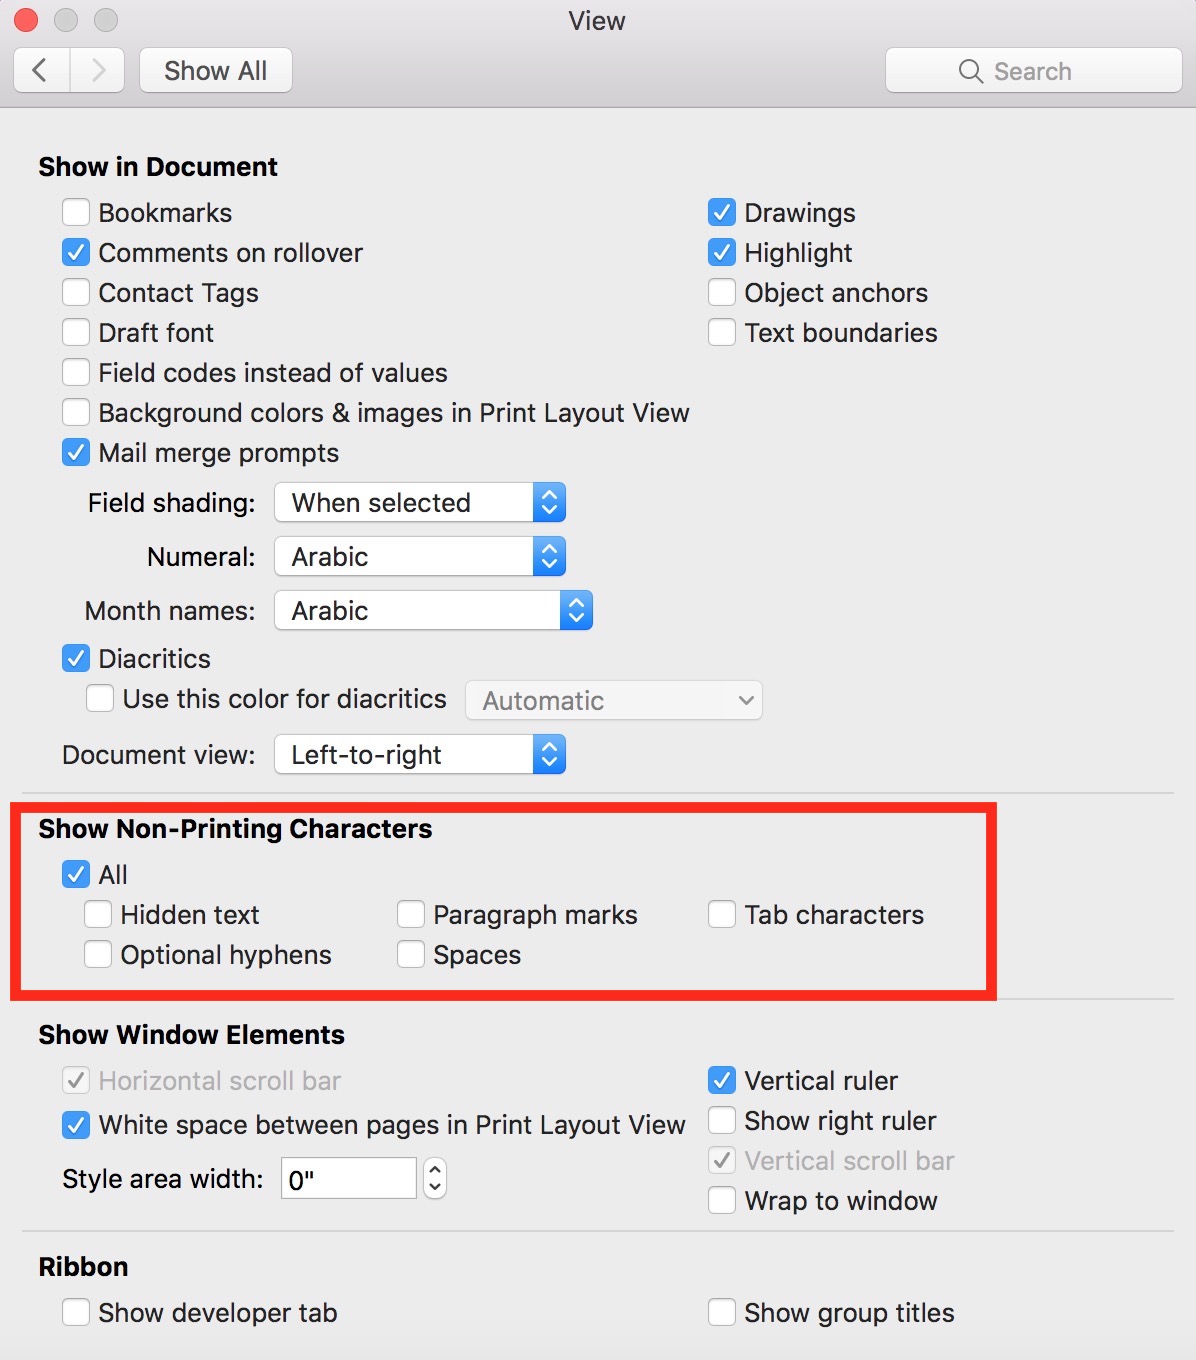 How to delete anchors in word 2016 for mac